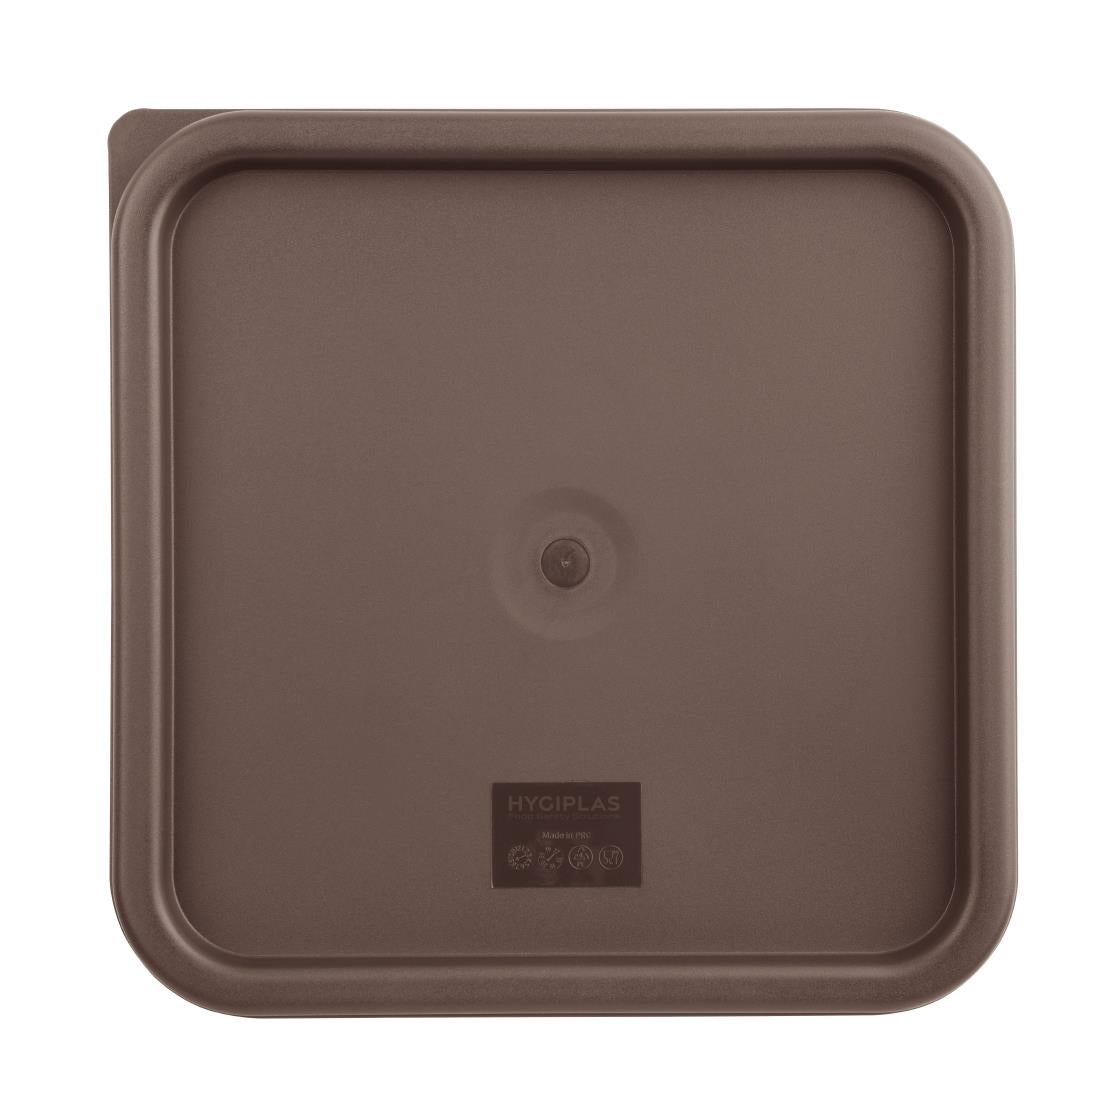 FX142 Hygiplas Square Food Storage Container Lid Brown Large